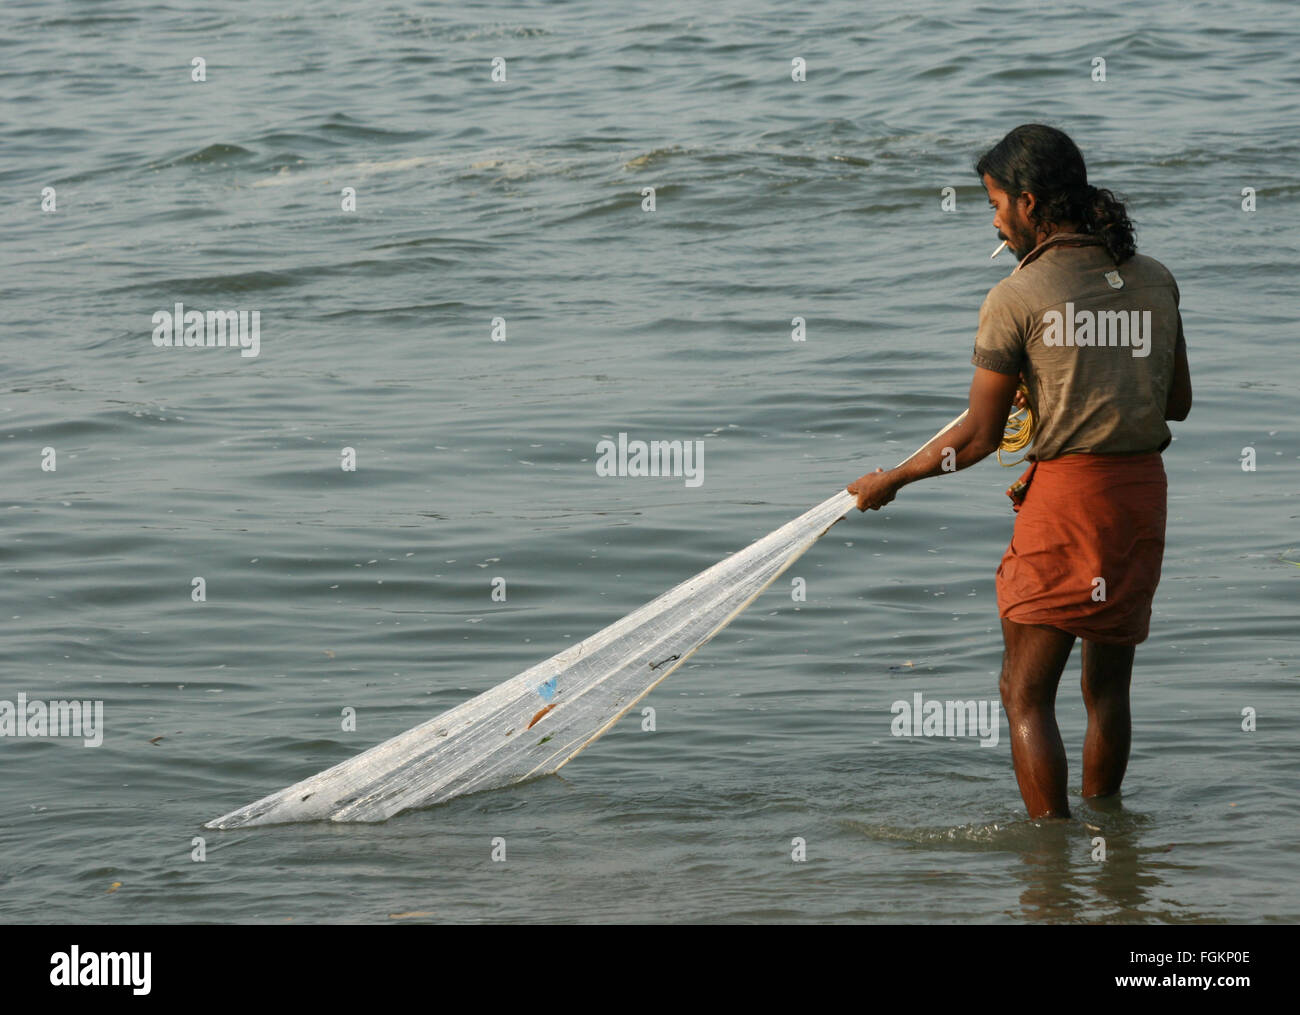 a young Indian fisherman smoking in a lungi hawling pulling in his fishing net from the beach, India Stock Photo